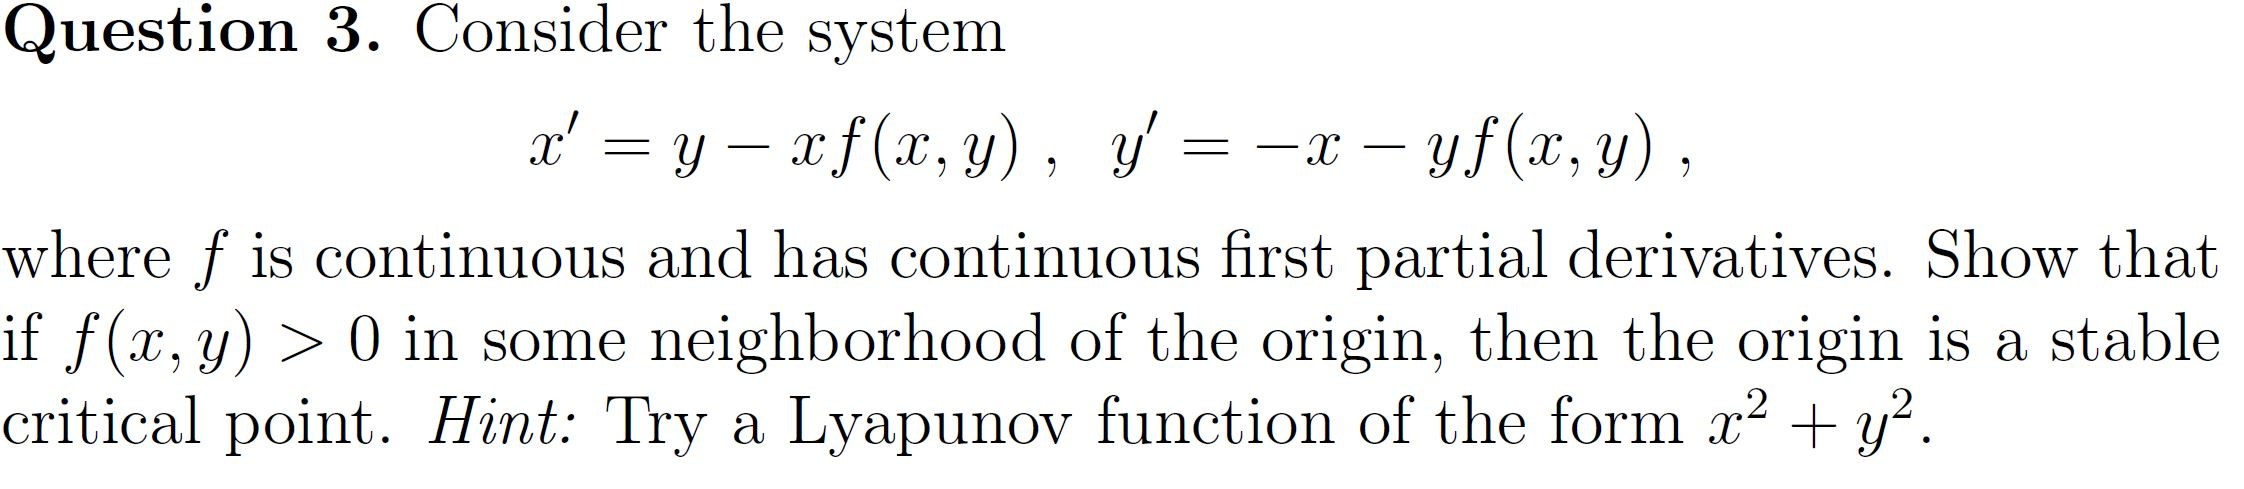 Question 3. Consider the system
x' = y – x f(x, y), y' = -x – yf (x, y),
where f is continuous and has continuous first partial derivatives. Show that
if f(x,y) > 0 in some neighborhood of the origin, then the origin is a stable
critical point. Hint: Try a Lyapunov function of the form x? + y².
